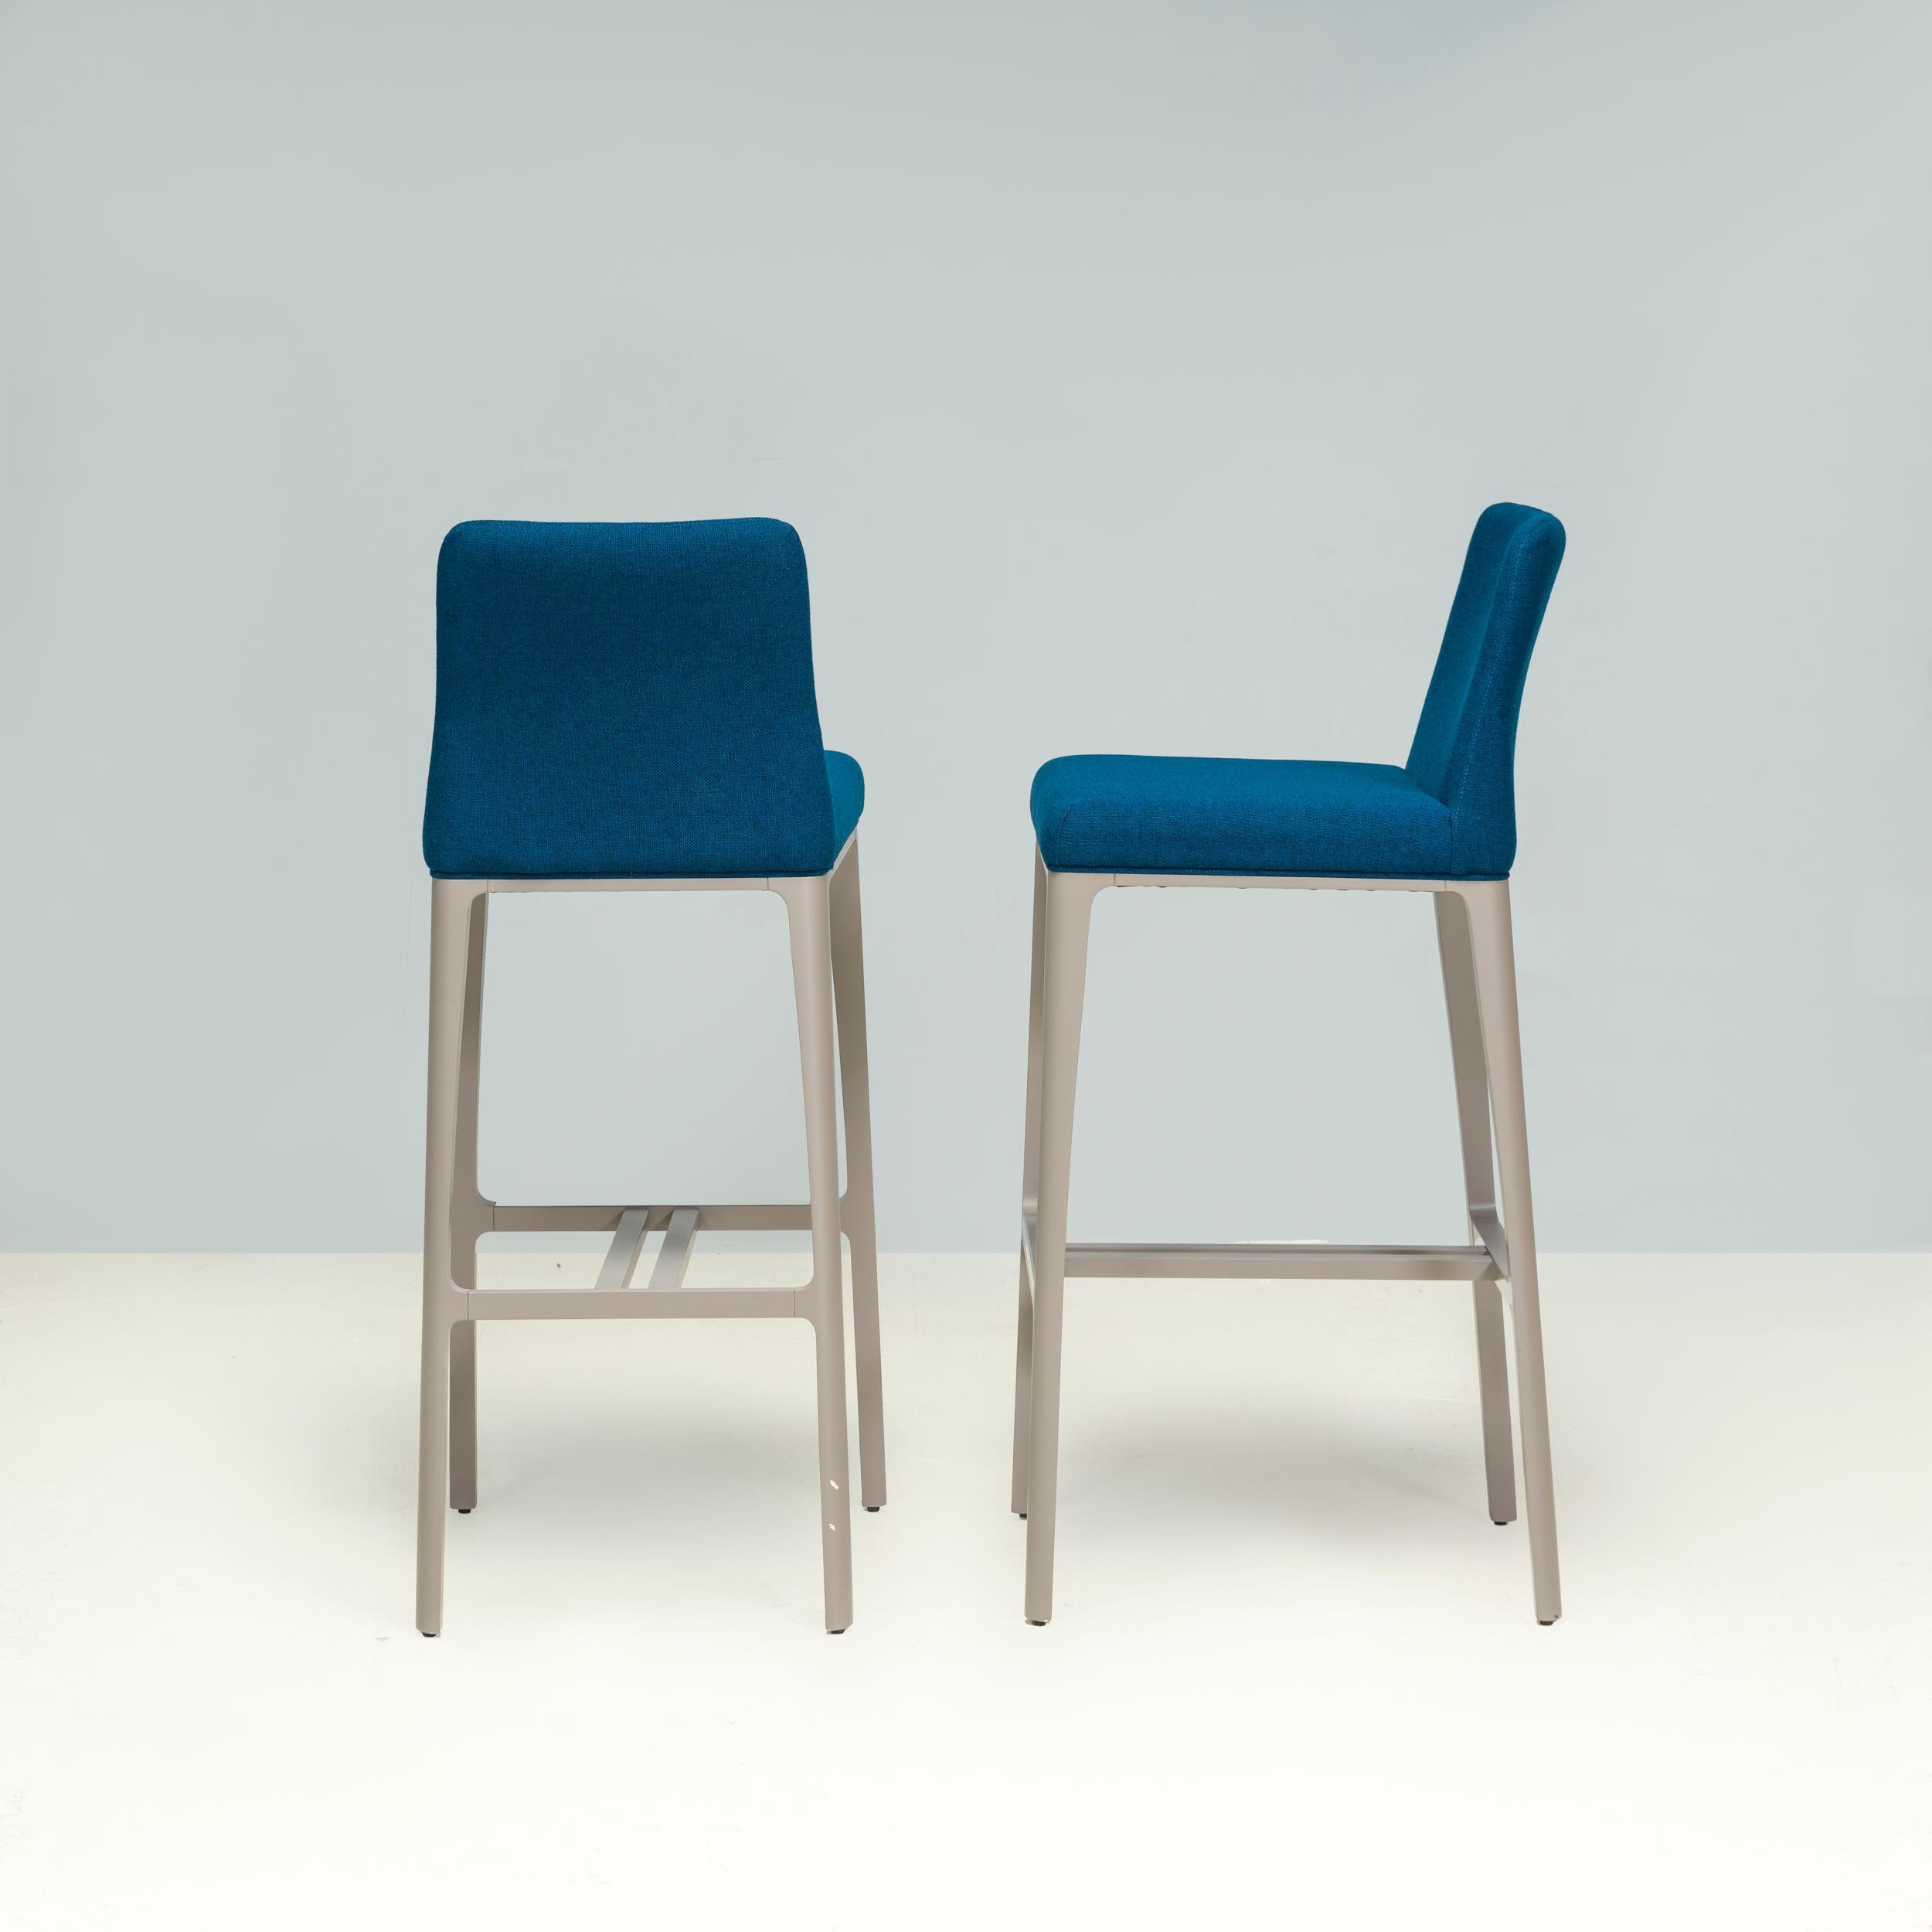 Designed by Carlesi Tonello Studio for Roche Bobois, the AIDA bar stool is a fantastic example of contemporary design,

Constructed from a beechwood frame, the stools have four elegant legs in a grey lacquered finish, with an aluminium footrest